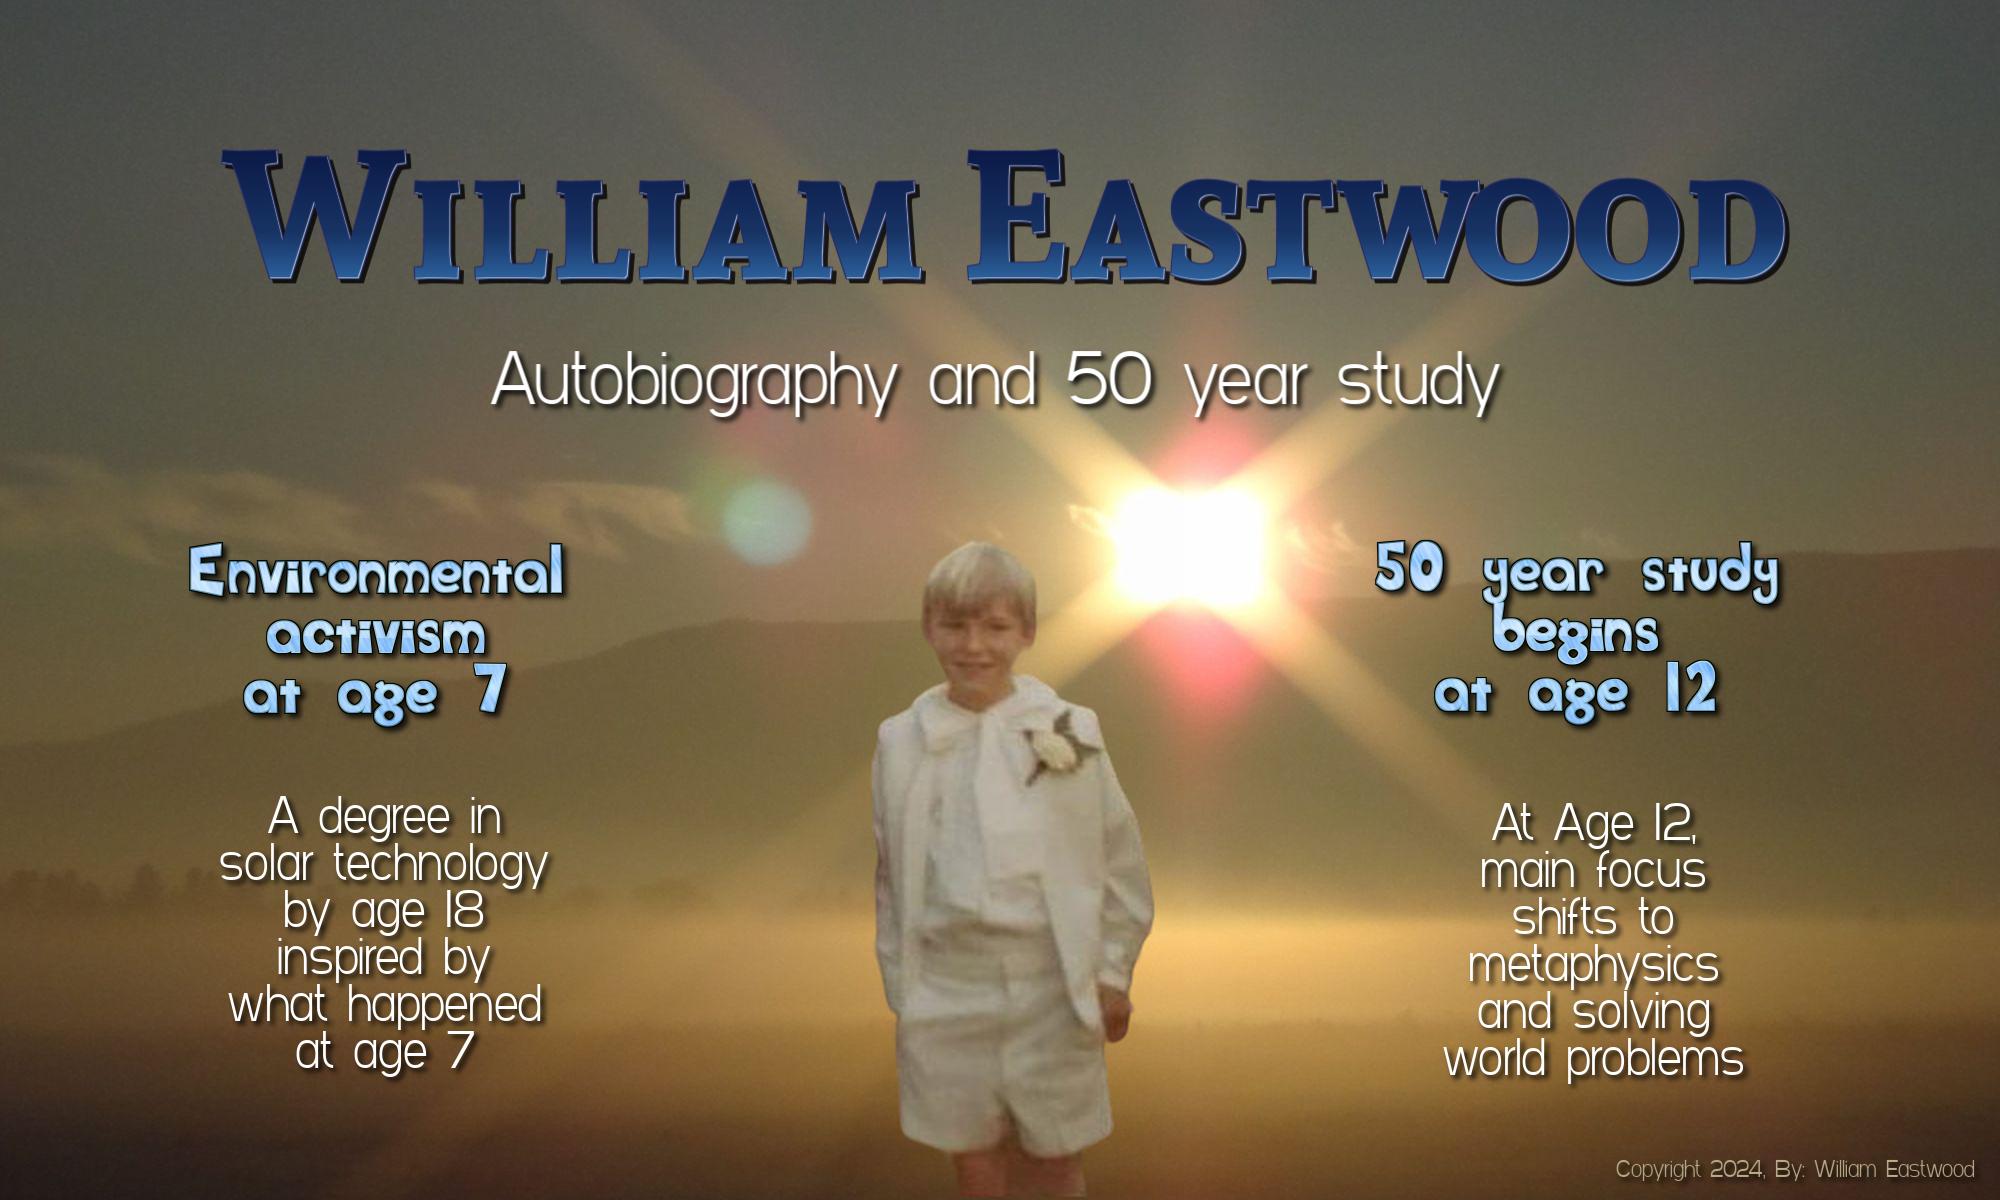 William Eastwood: Autobiography & 50 Year Study background not criminal not scam